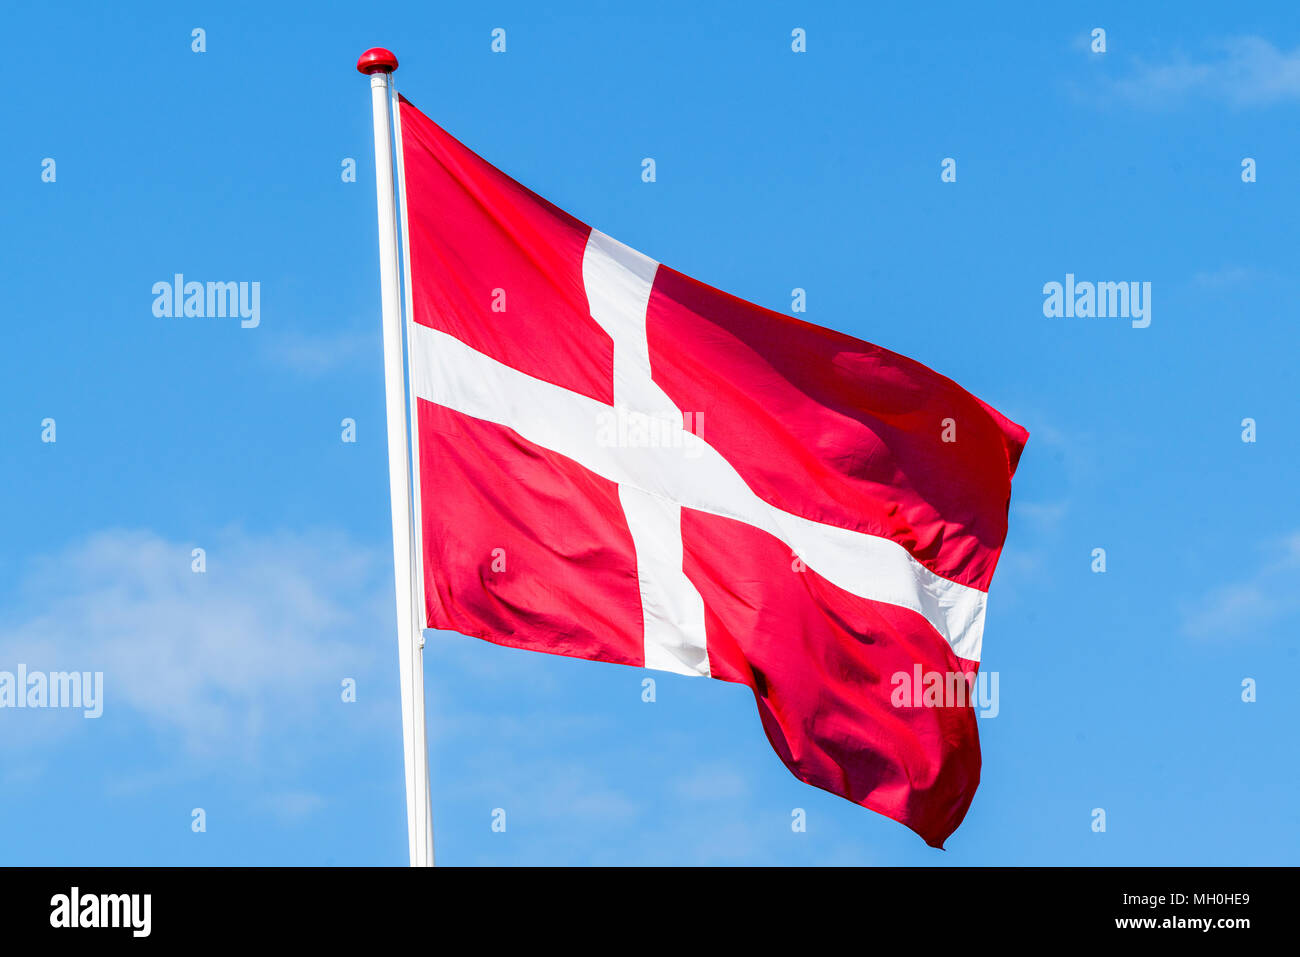 Flag of Denmark in red and white colors waving in the wind on a blue sky Stock Photo